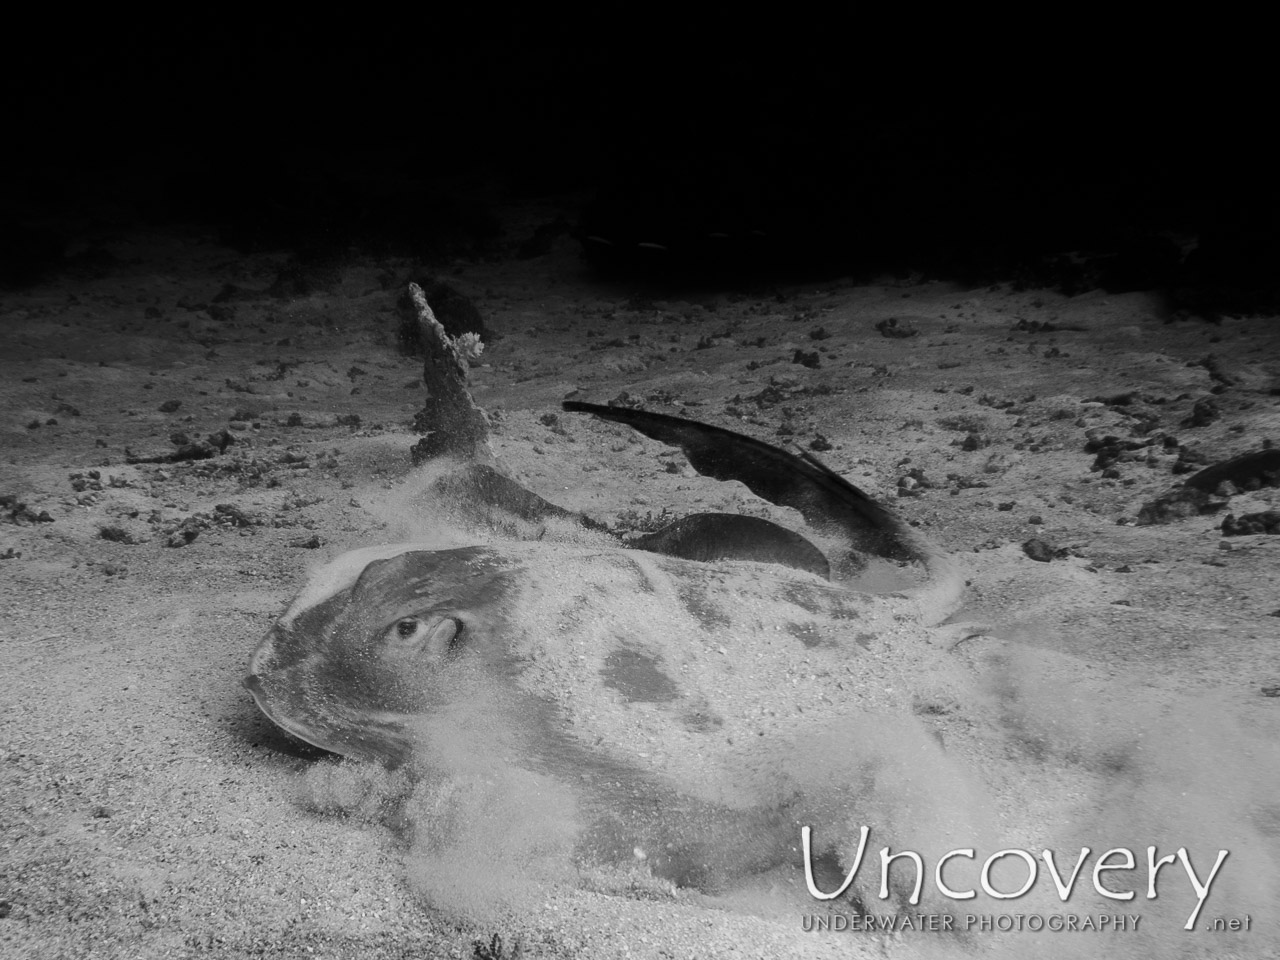 Cowtail Stingray (pastinachus Sephen), photo taken in Maldives, Male Atoll, South Male Atoll, South Reef Out